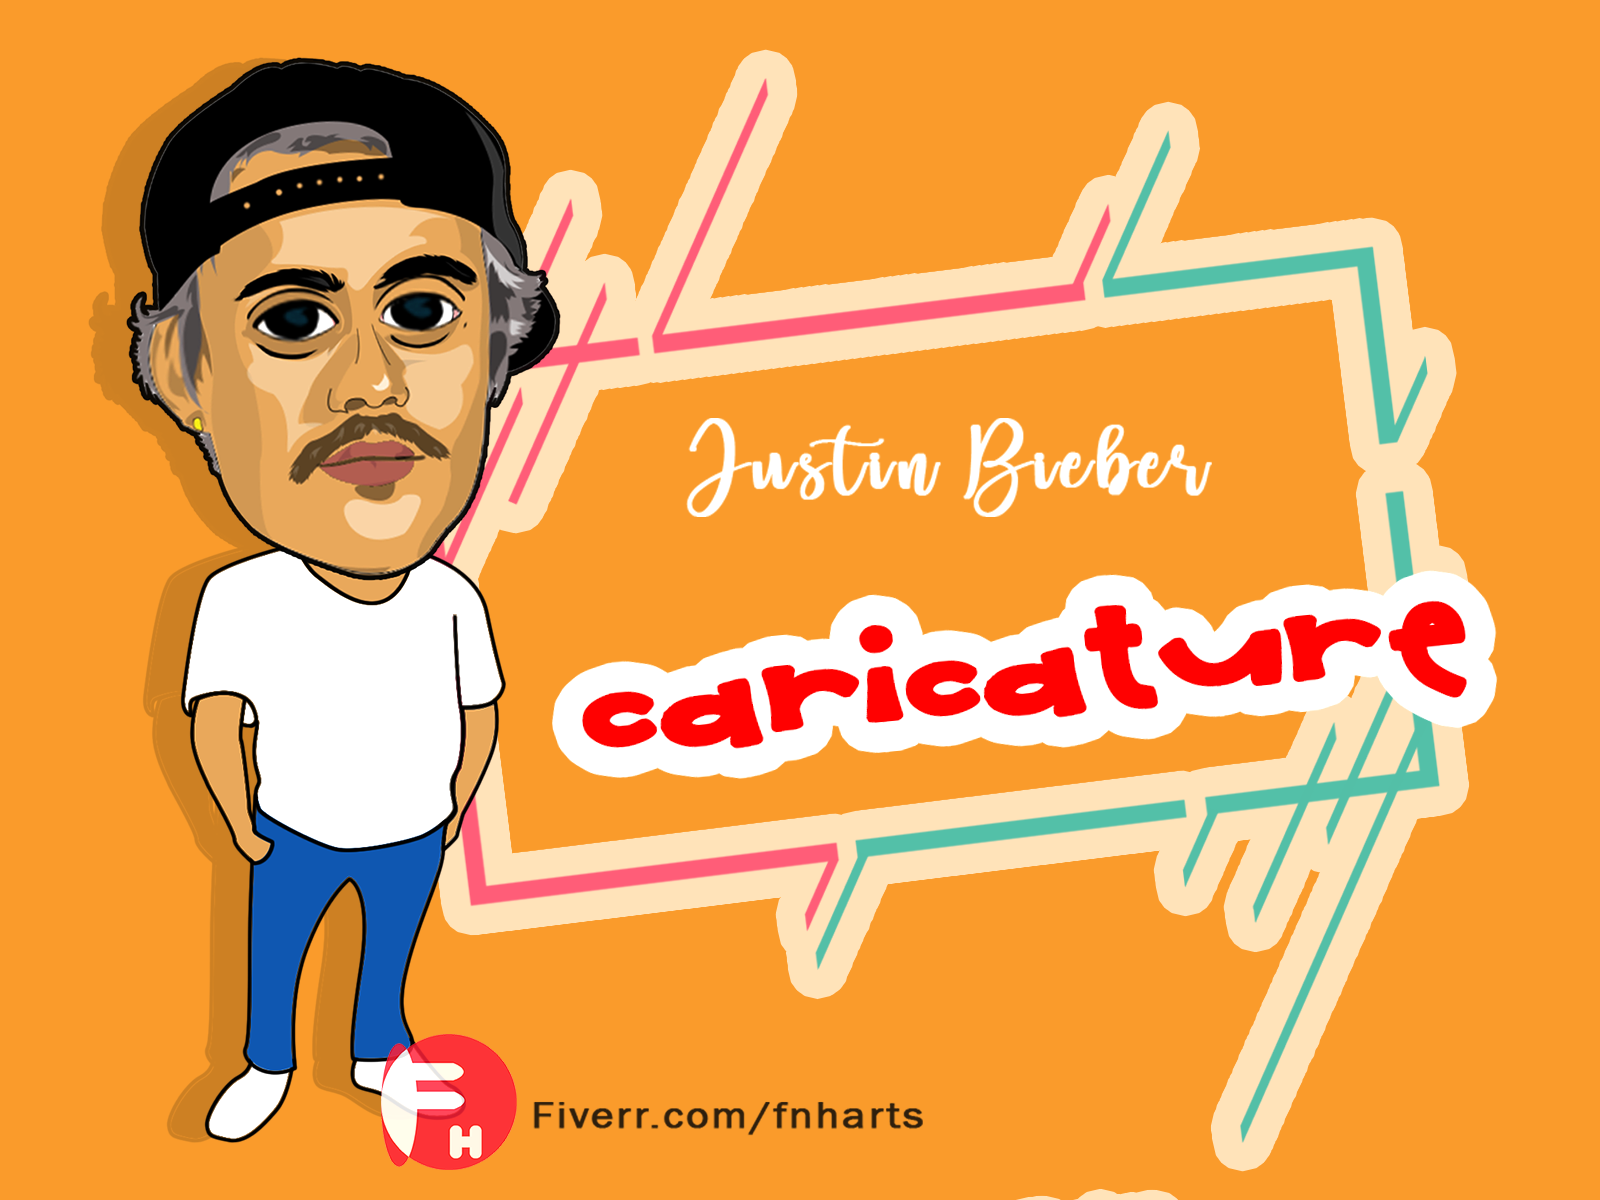 justin bieber cartoon caricature avatar by Fnharts on Dribbble